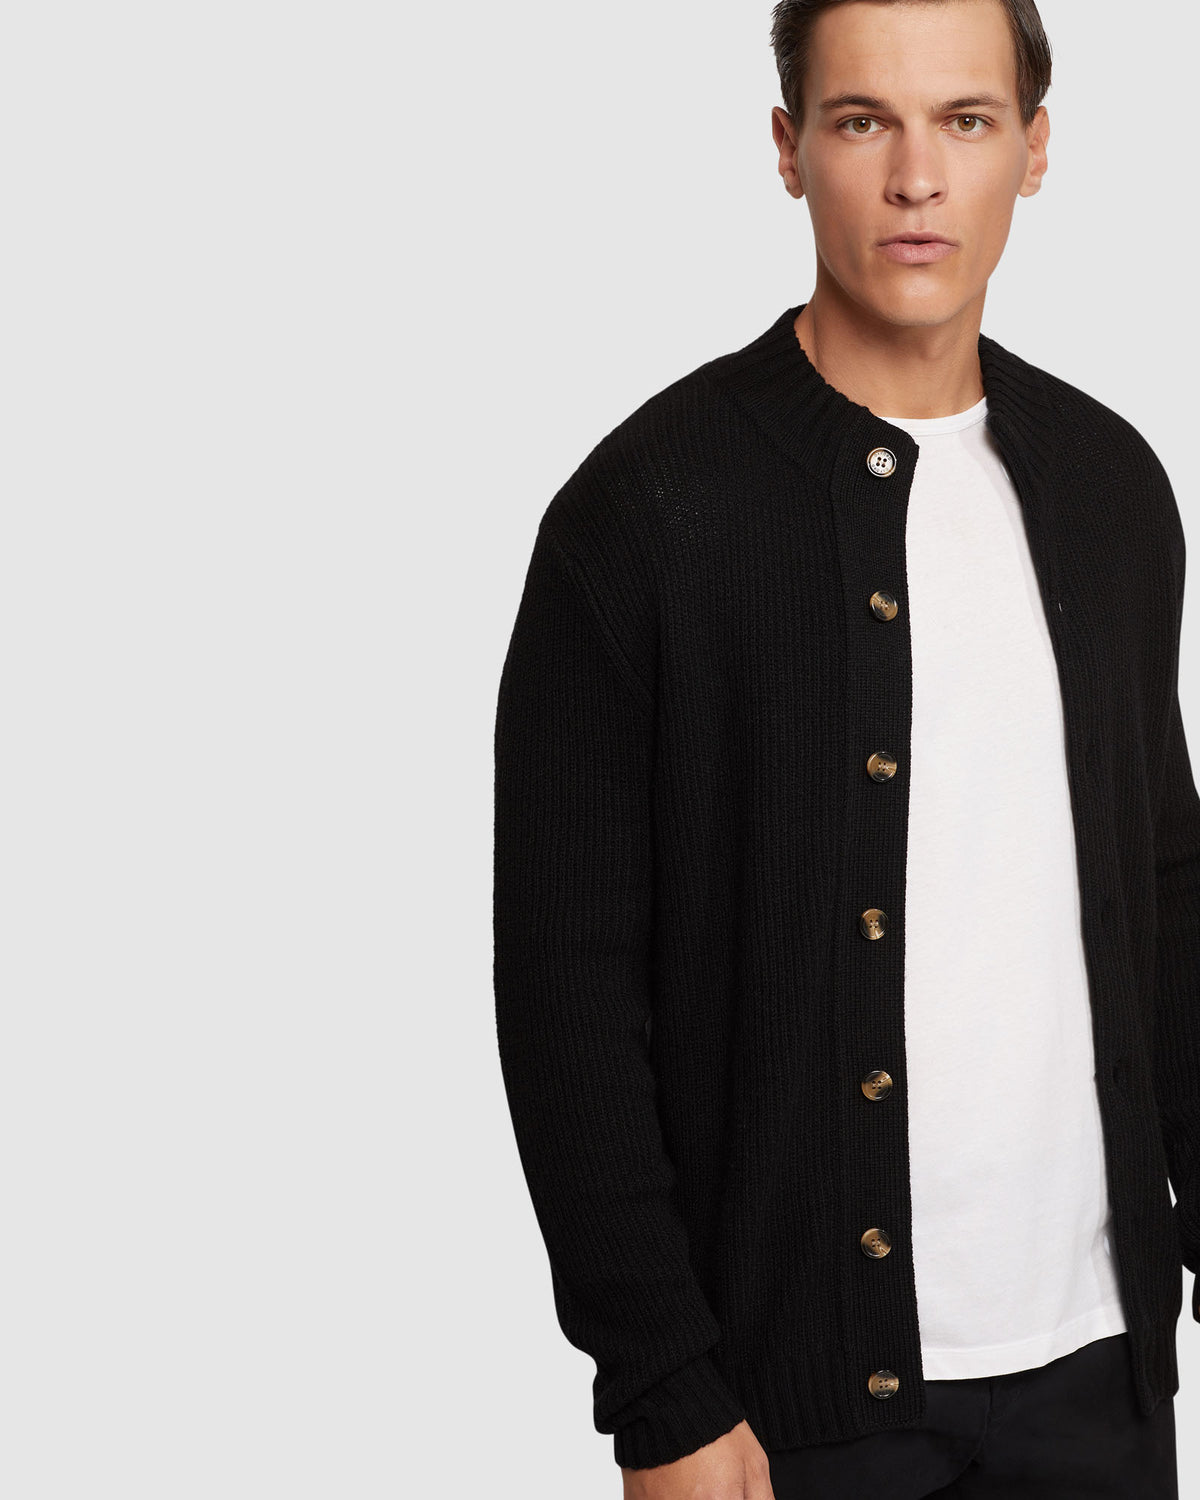 LENNY BUTTON UP CARDIGAN MENS KNITWEAR